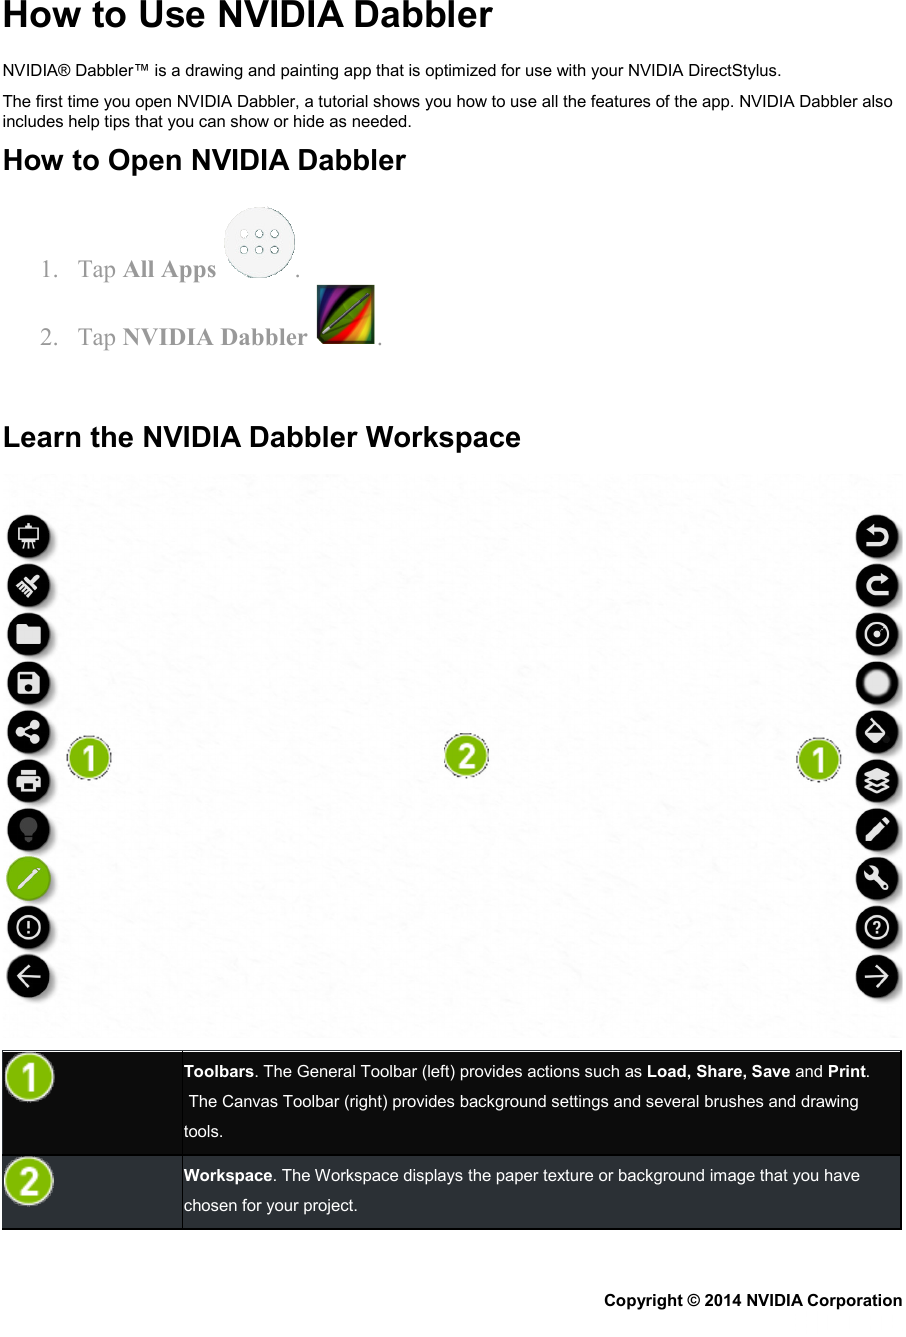  How to Use NVIDIA Dabbler NVIDIA® Dabbler™ is a drawing and painting app that is optimized for use with your NVIDIA DirectStylus. The first time you open NVIDIA Dabbler, a tutorial shows you how to use all the features of the app. NVIDIA Dabbler also includes help tips that you can show or hide as needed. How to Open NVIDIA Dabbler 1. Tap All Apps  . 2. Tap NVIDIA Dabbler  .   Learn the NVIDIA Dabbler Workspace   Toolbars. The General Toolbar (left) provides actions such as Load, Share, Save and Print.  The Canvas Toolbar (right) provides background settings and several brushes and drawing tools.   Workspace. The Workspace displays the paper texture or background image that you have chosen for your project. Copyright © 2014 NVIDIA Corporation   